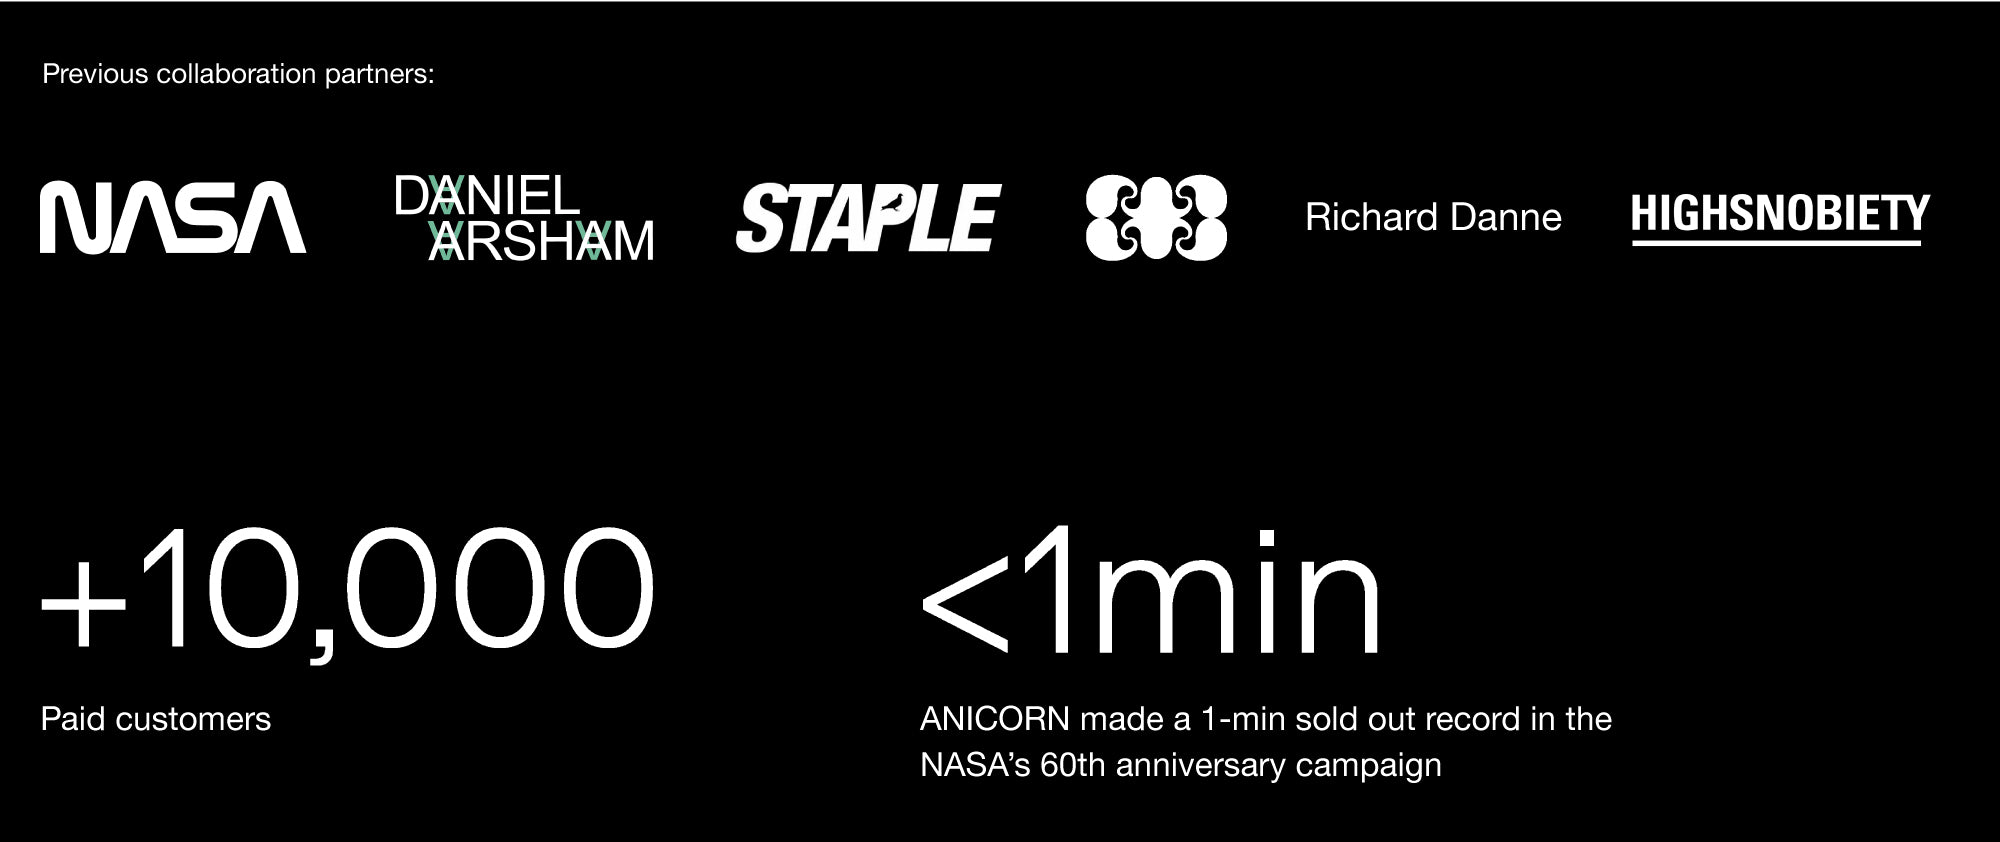 A banner which shows the previous collaboration partners included NASA, Daniel Arsham, Staple, M/M, Richard Danne, Highsnobiety. 